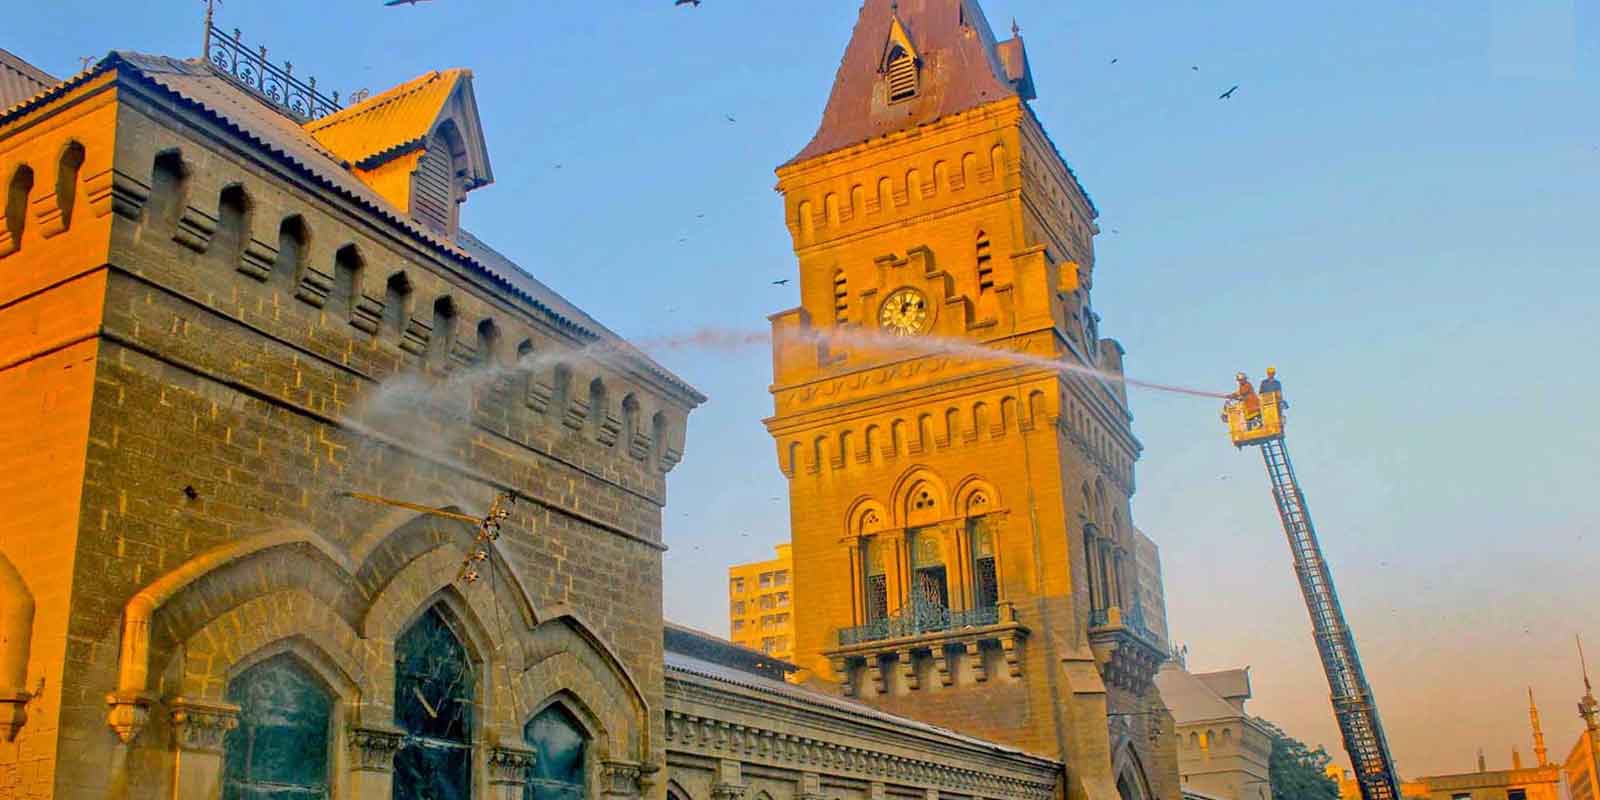 This is how Empress Market will look like after restoration